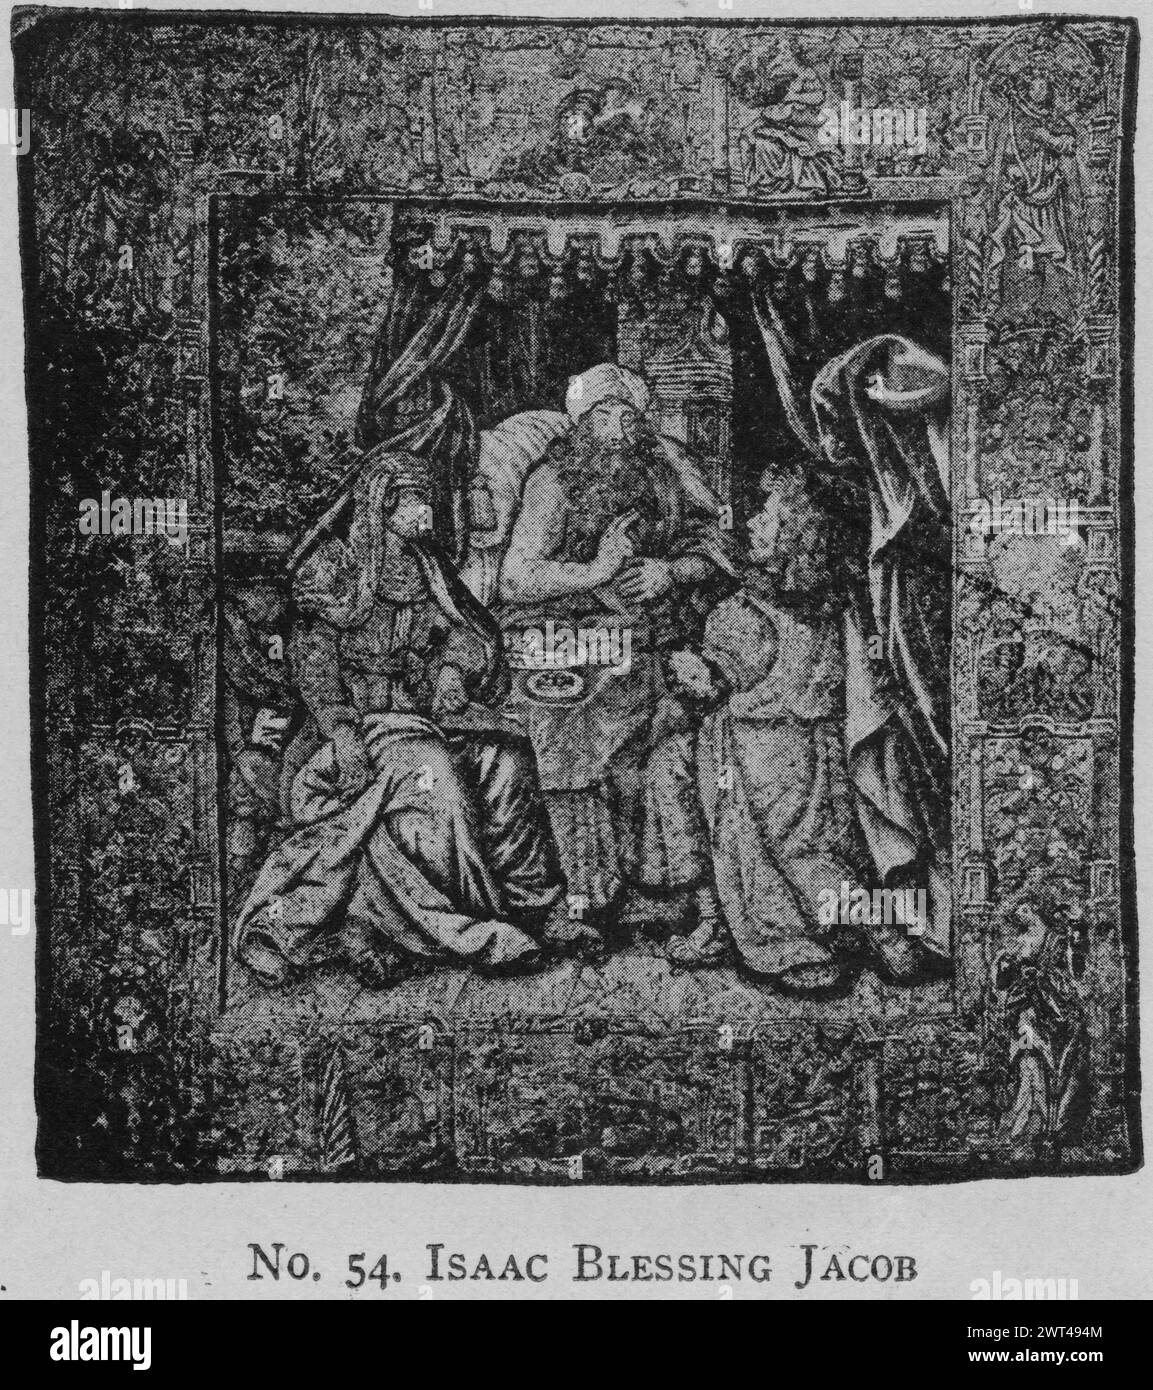 Isaac's blessing of Jacob and Esau. unknown c. 1590-1600 Tapestry Materials/Techniques: unknown Culture: Flemish Weaving Center: unknown In bedchamber, Isaac lying in bed blesses Jacob who, disguised in Esau's clothes, brings food to his father; Jacob's hands & neck are covered with goatskins (Genesis 27) (BRD) segmented border with female allegorical figures standing beneath arches; vases of flowers & fruit, & other decorative elements Related Works: Compositionally similar tapestry: GCPA 0237281 Stock Photo